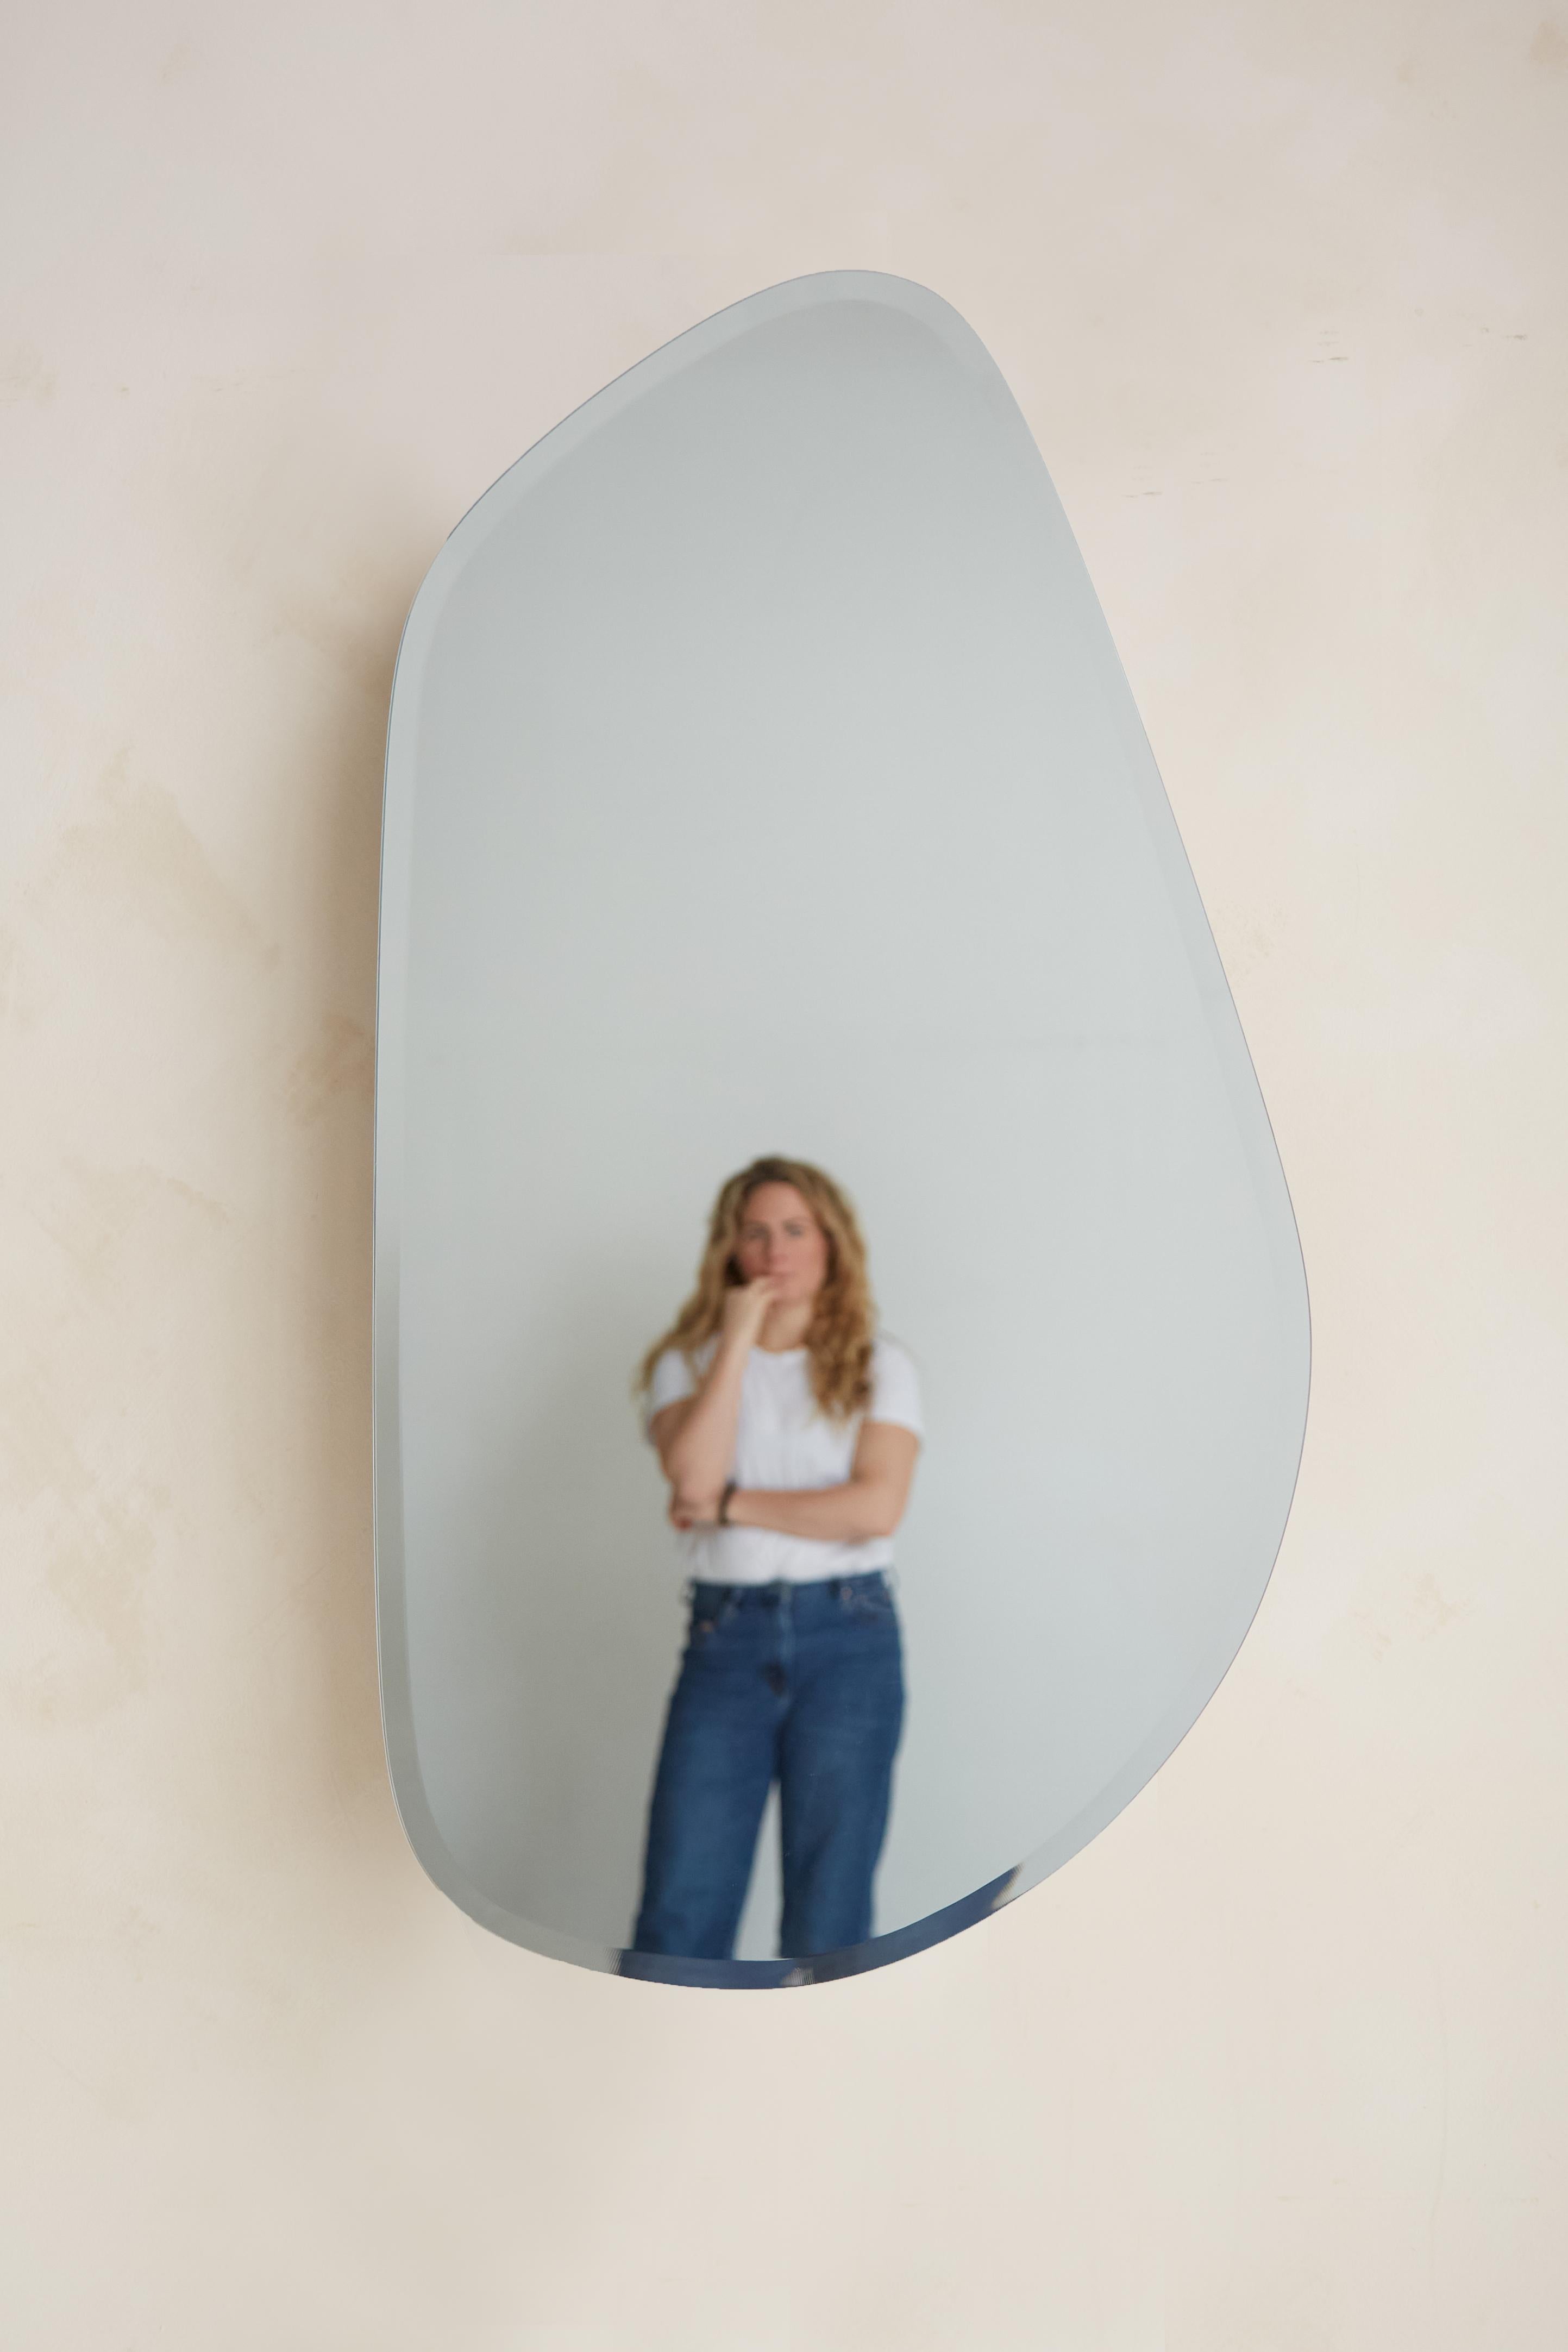 GEOMORPH MIRROR
The Geomorph Mirror is a visual break from the rest of the furnishings, echoing the same design inspiration without any visible wood components.  Its organic shape is reminiscent of soft, weathered beach pebbles along the California